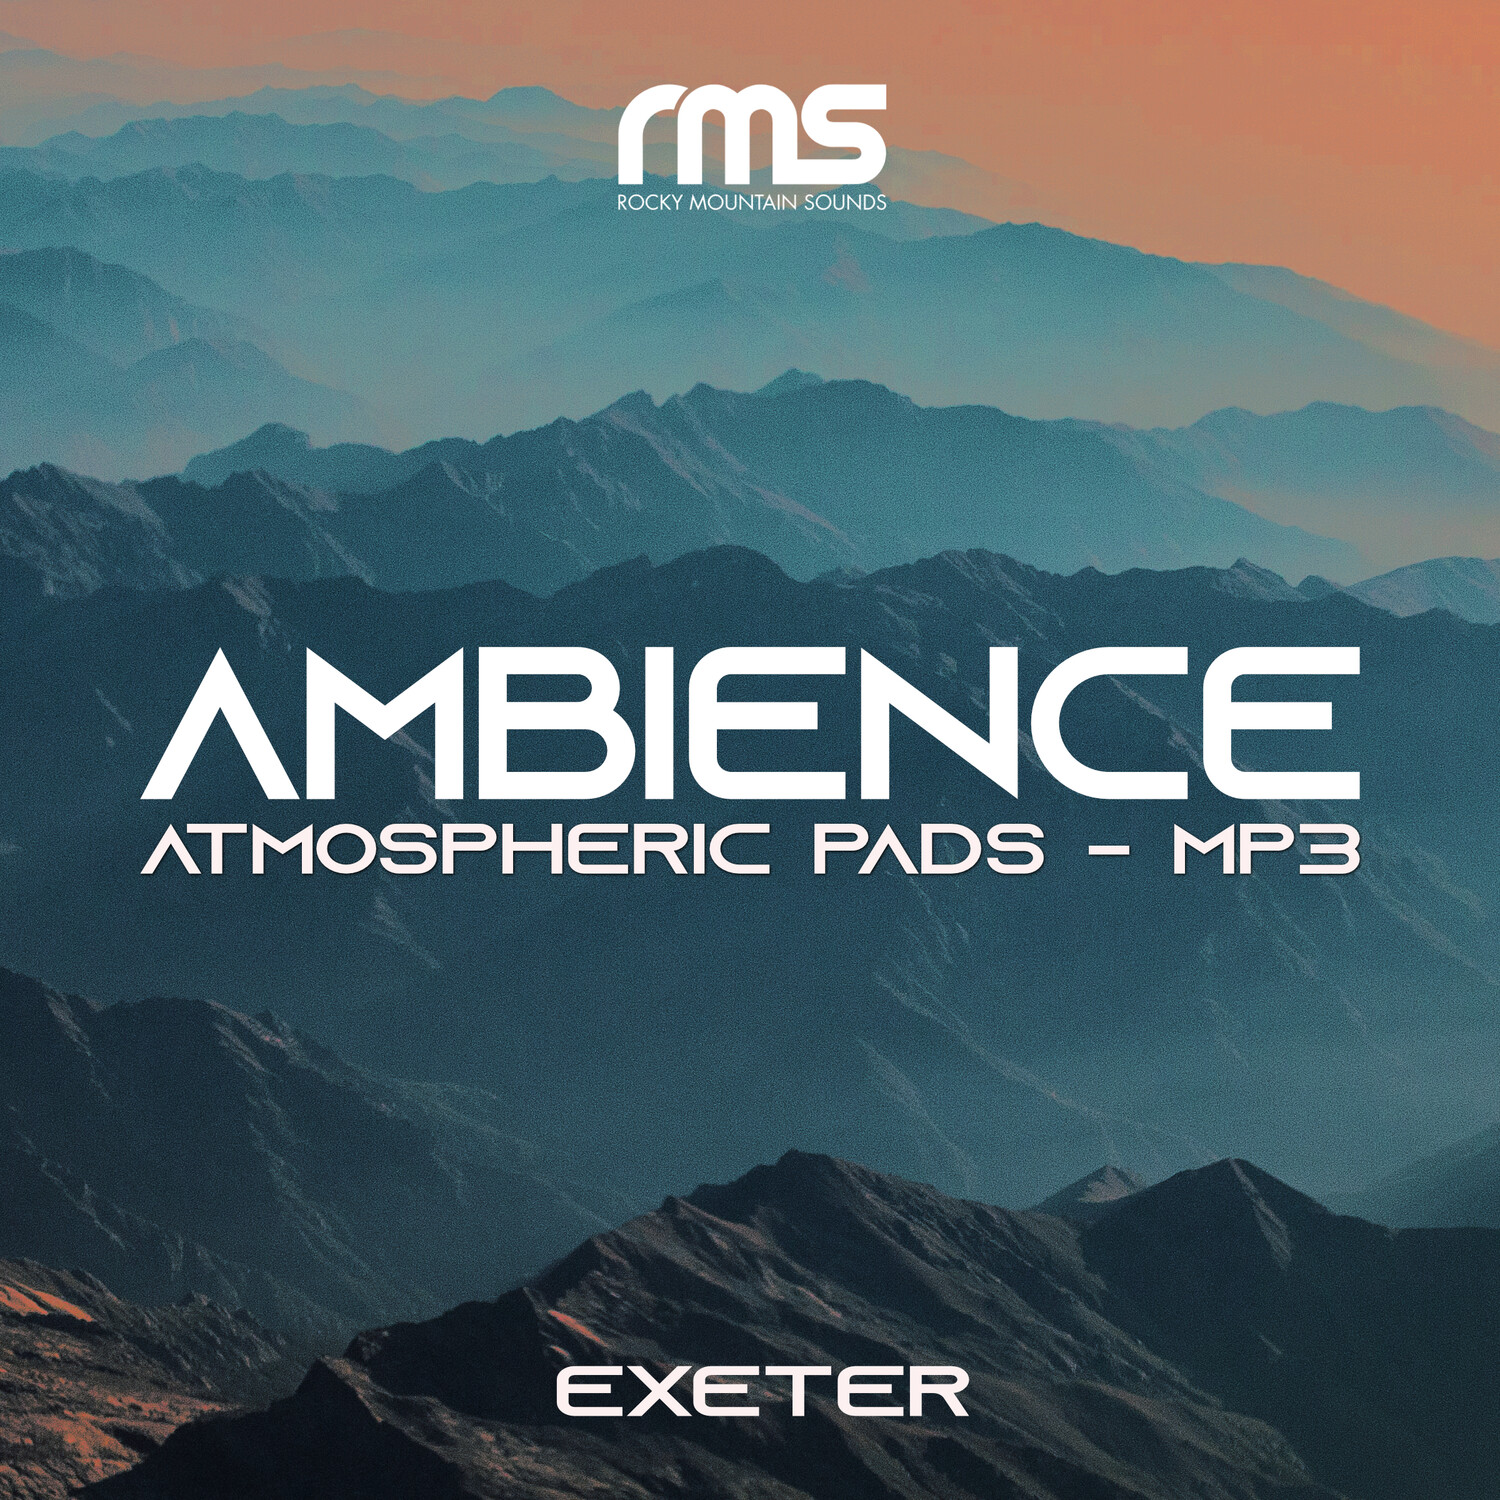 [WSBT] Ambience Exeter Pads